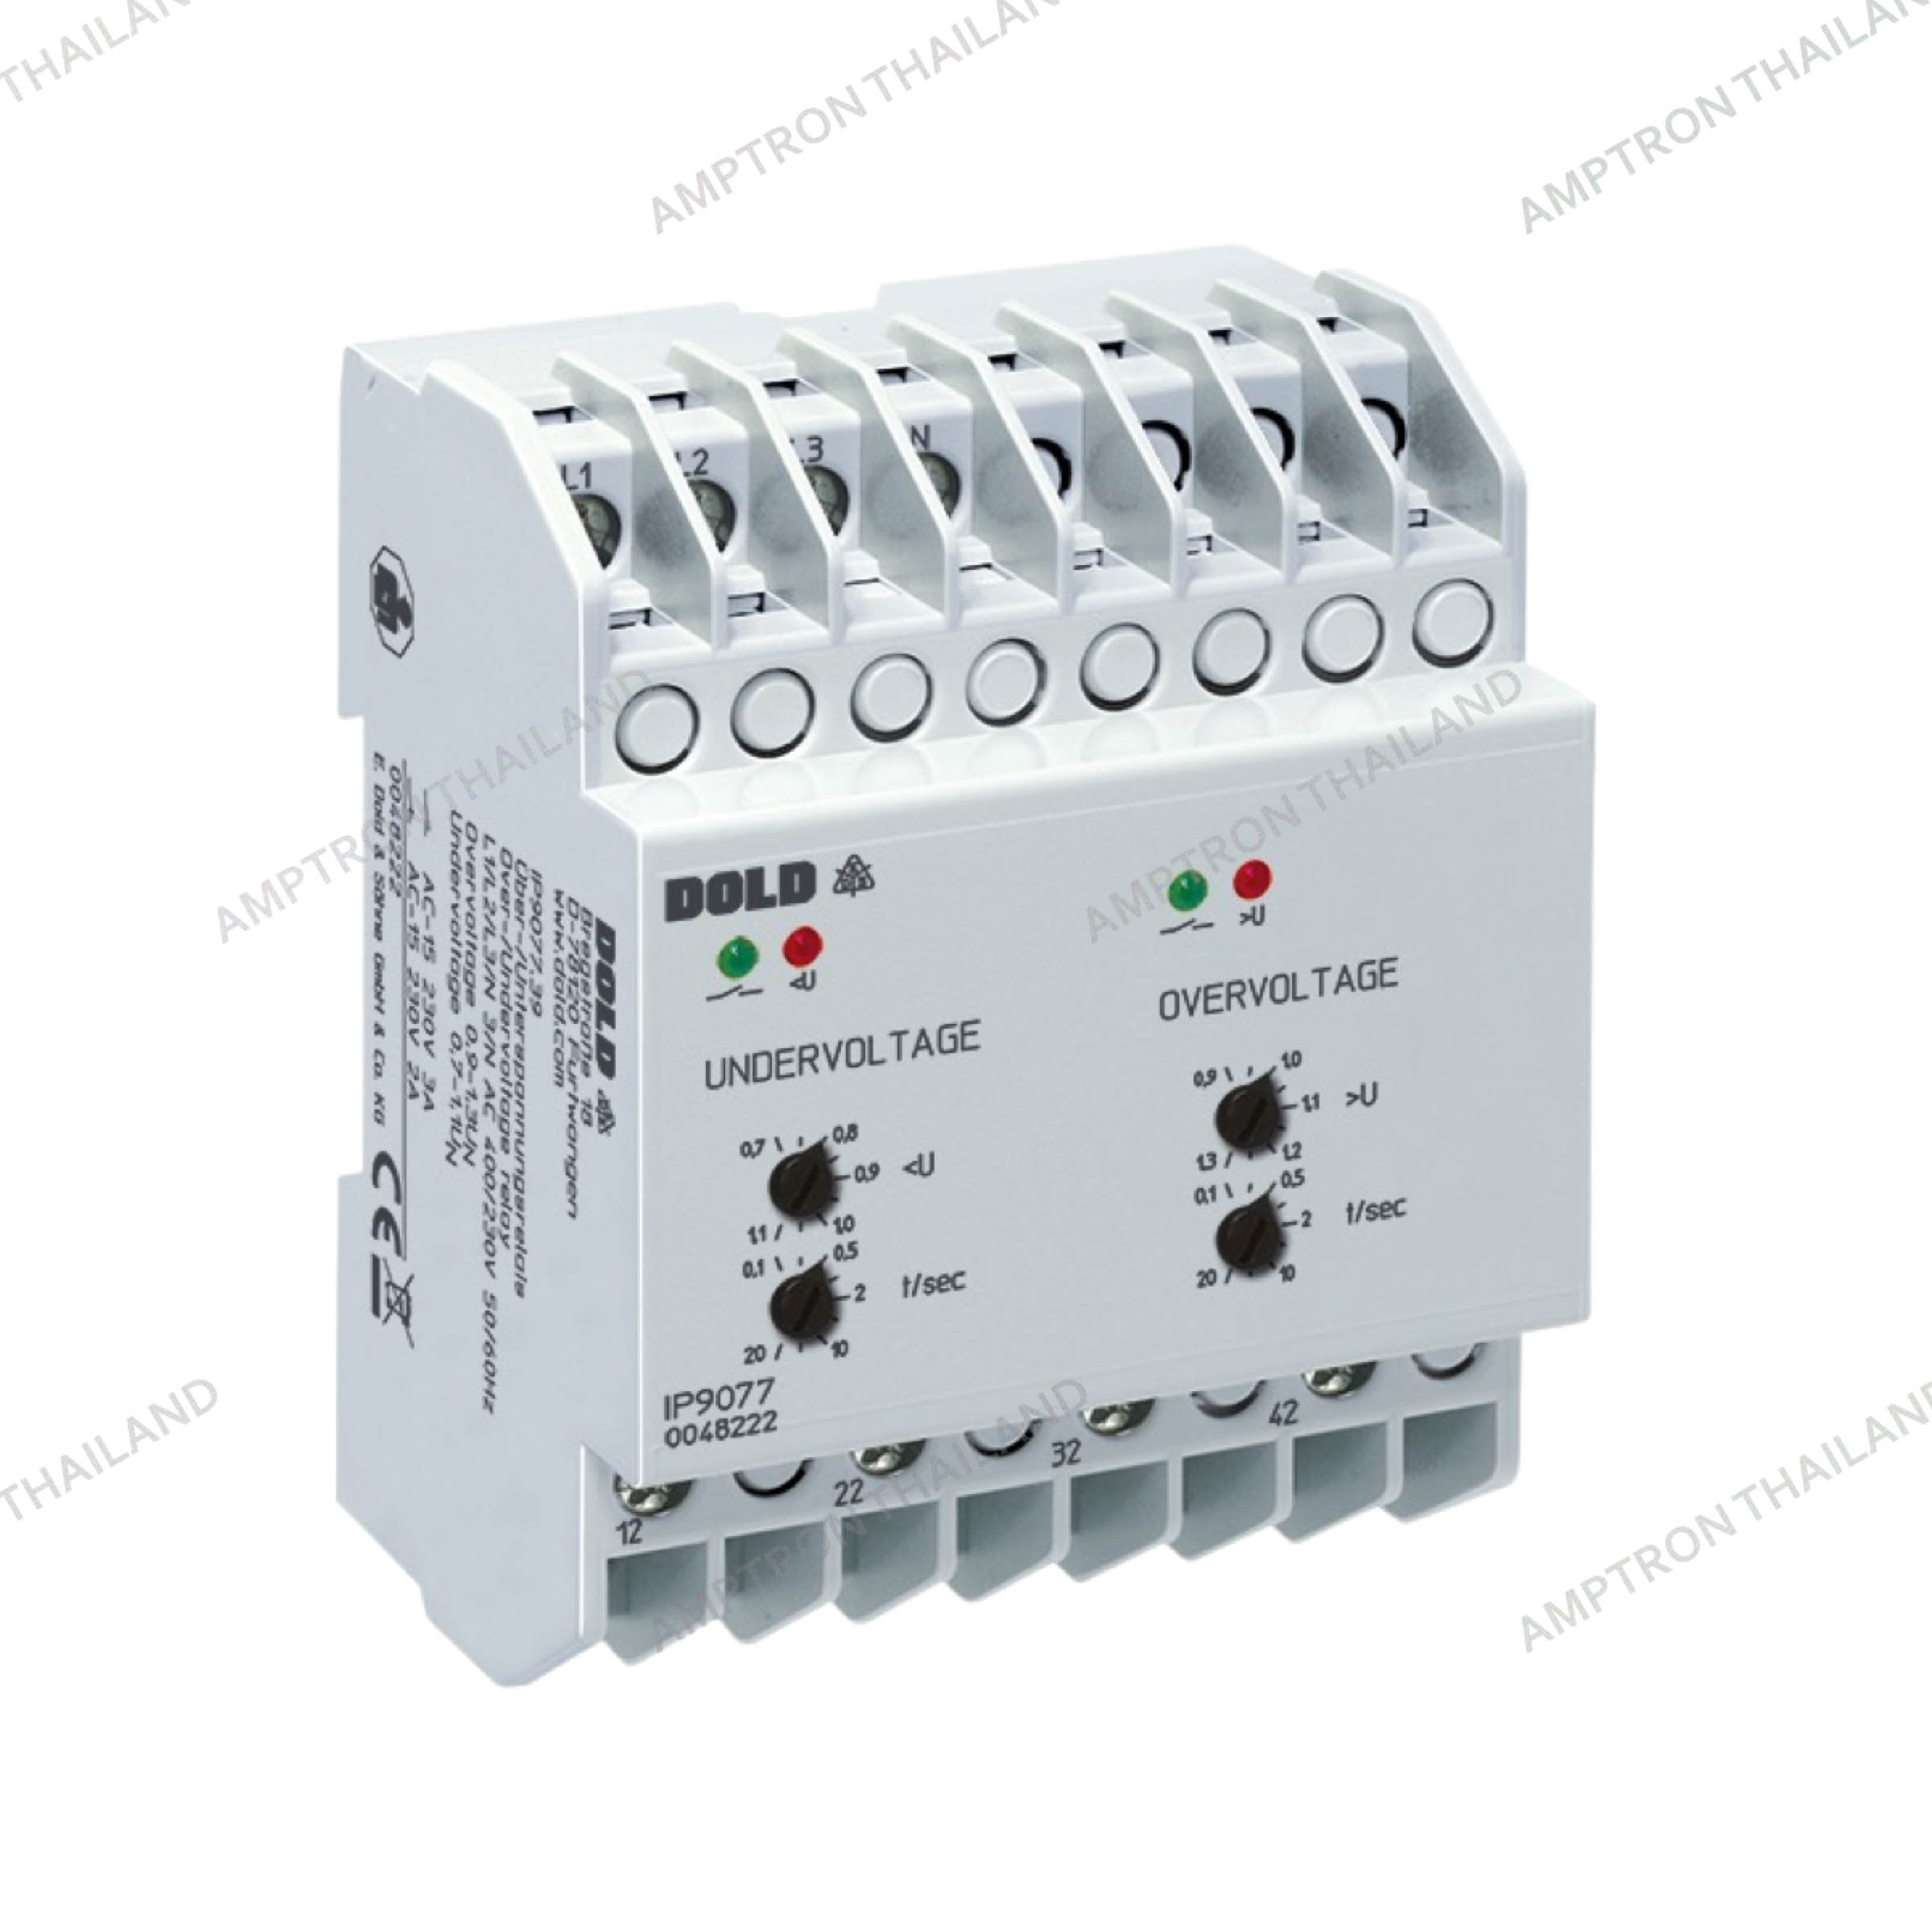 IL 9077 Varimeter PRO Over- and Undervoltage Relay